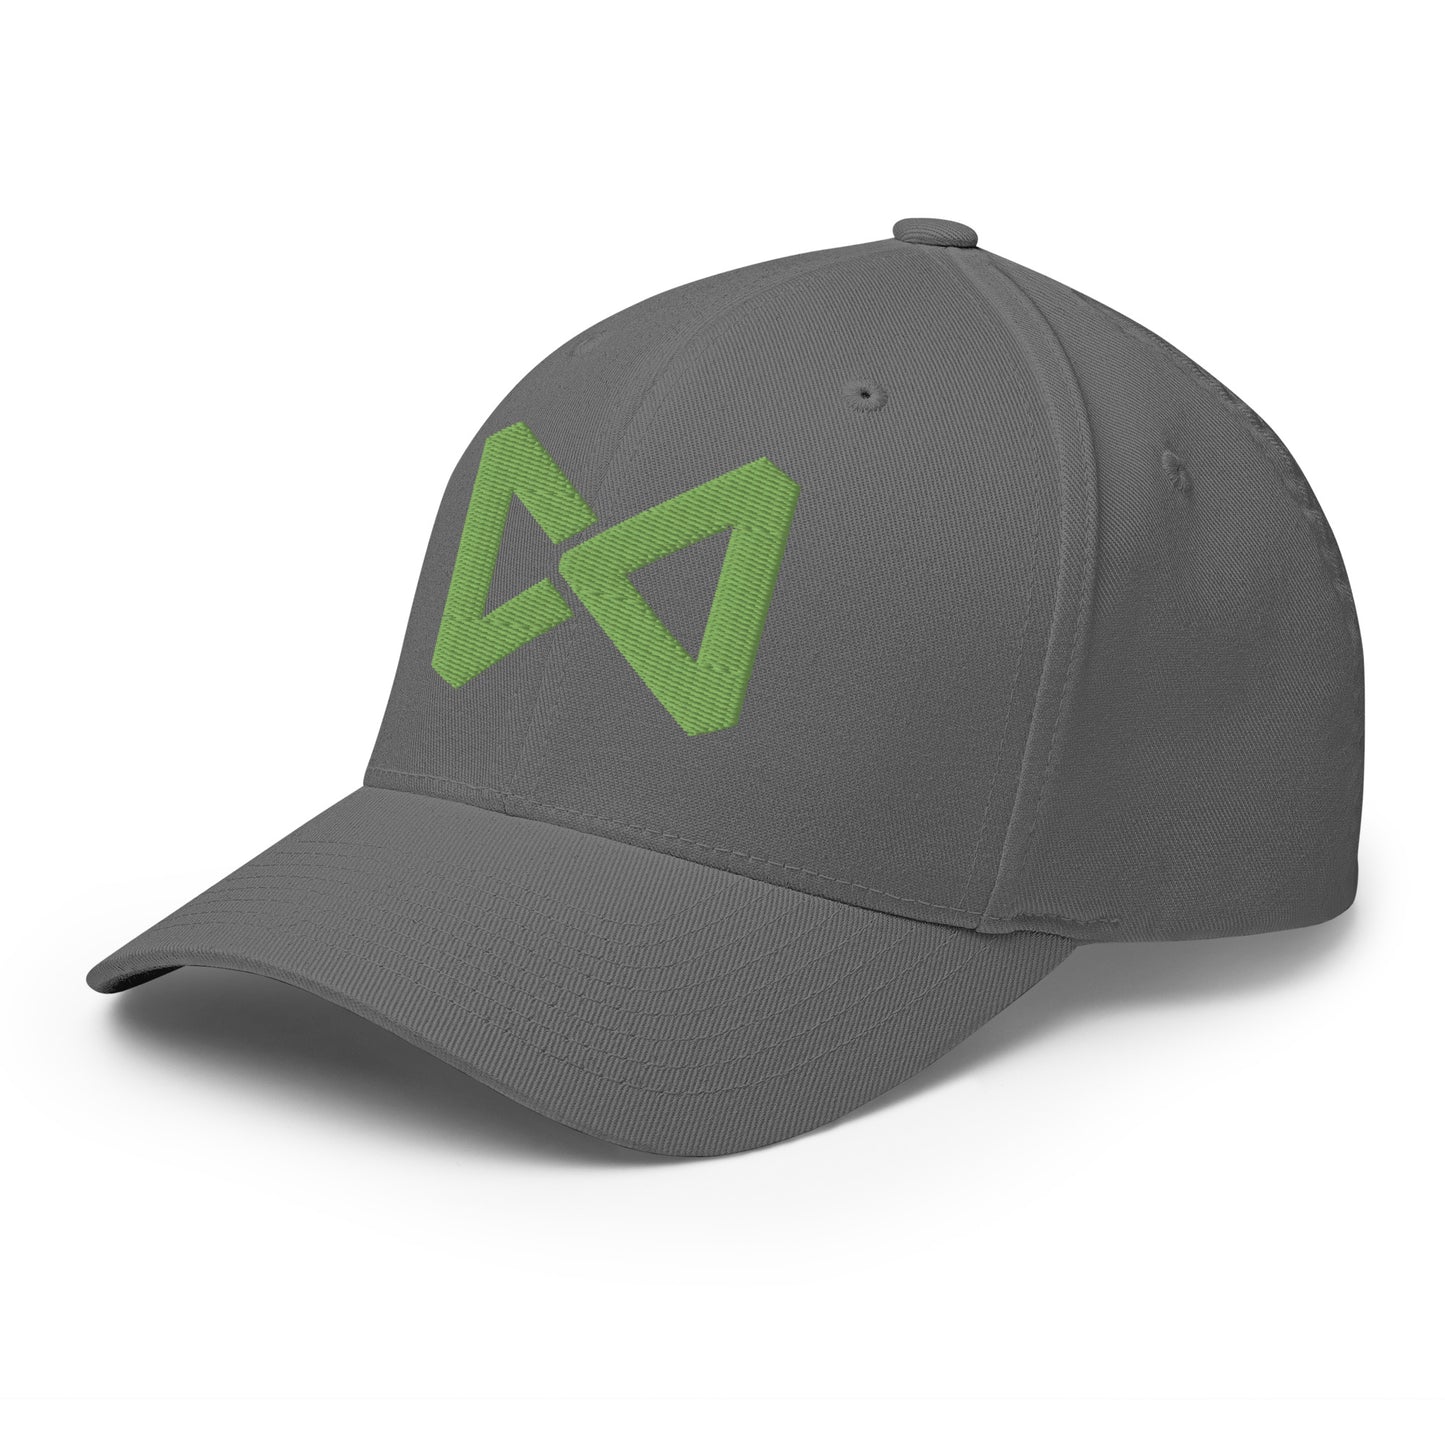 Baseball Cap with Double Triangles Symbol